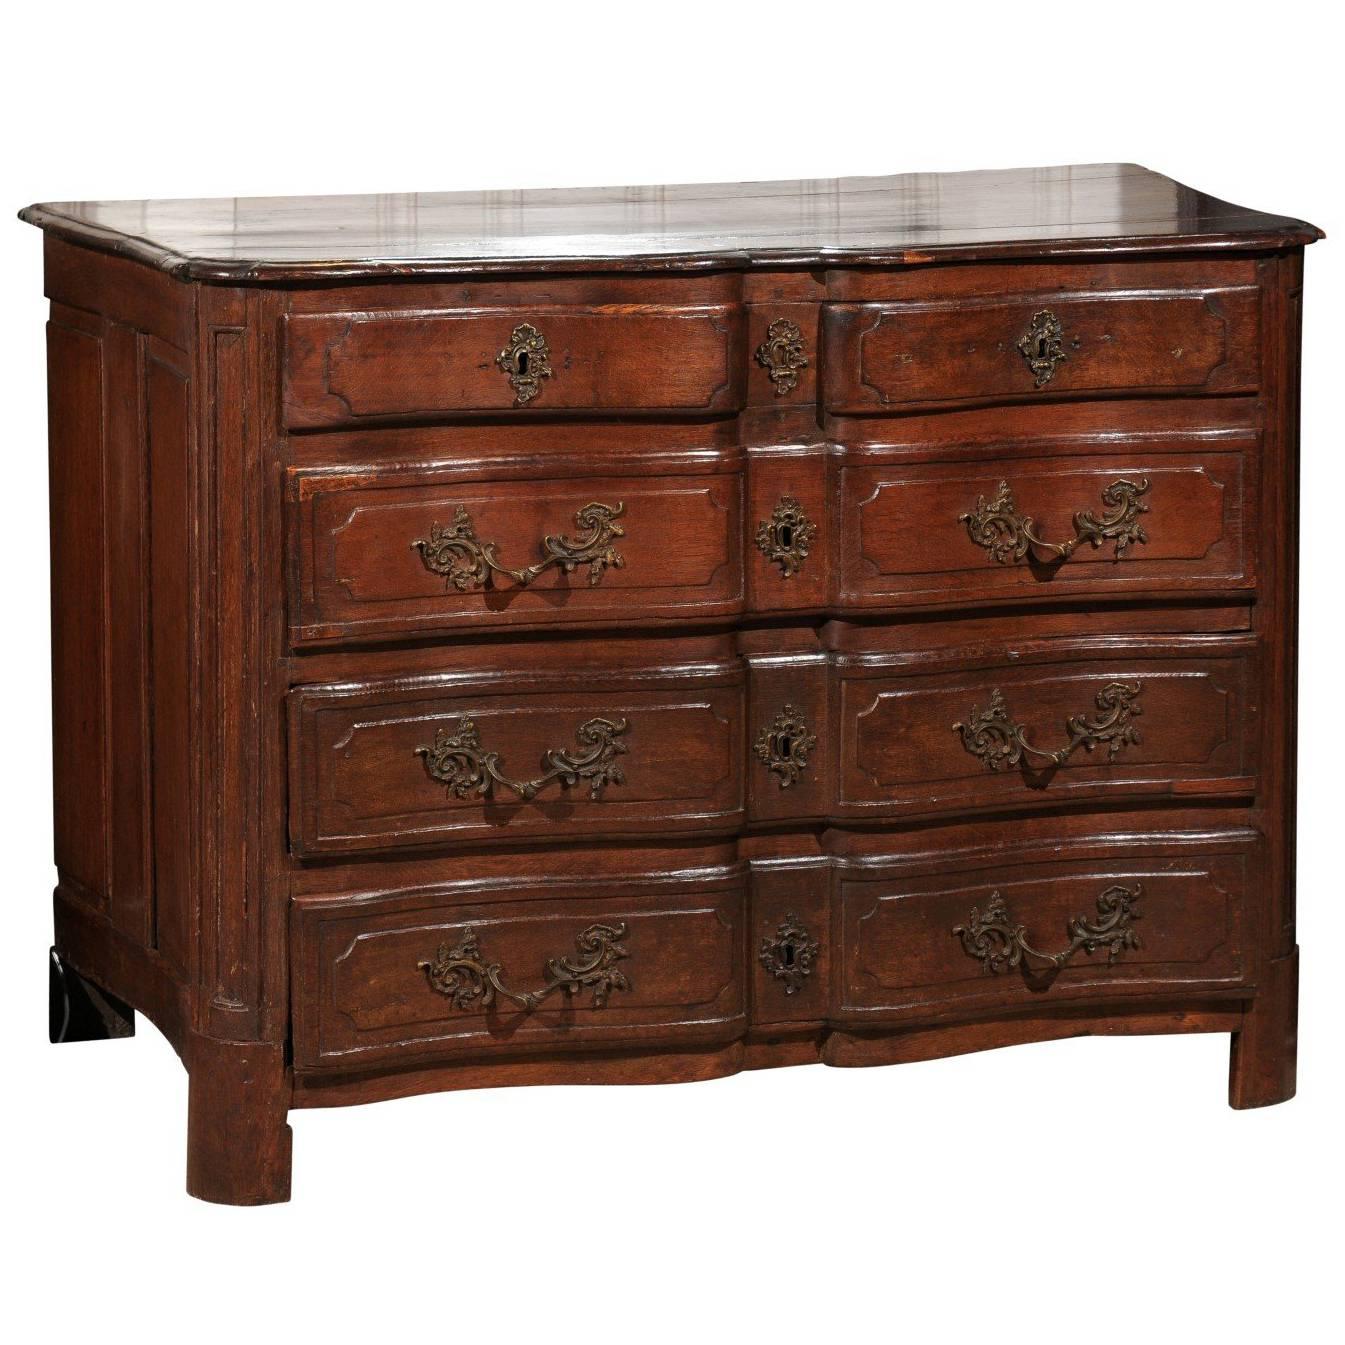 French Walnut Commode or Chest, Carved Drawers, Original Hardware, circa 1800 For Sale